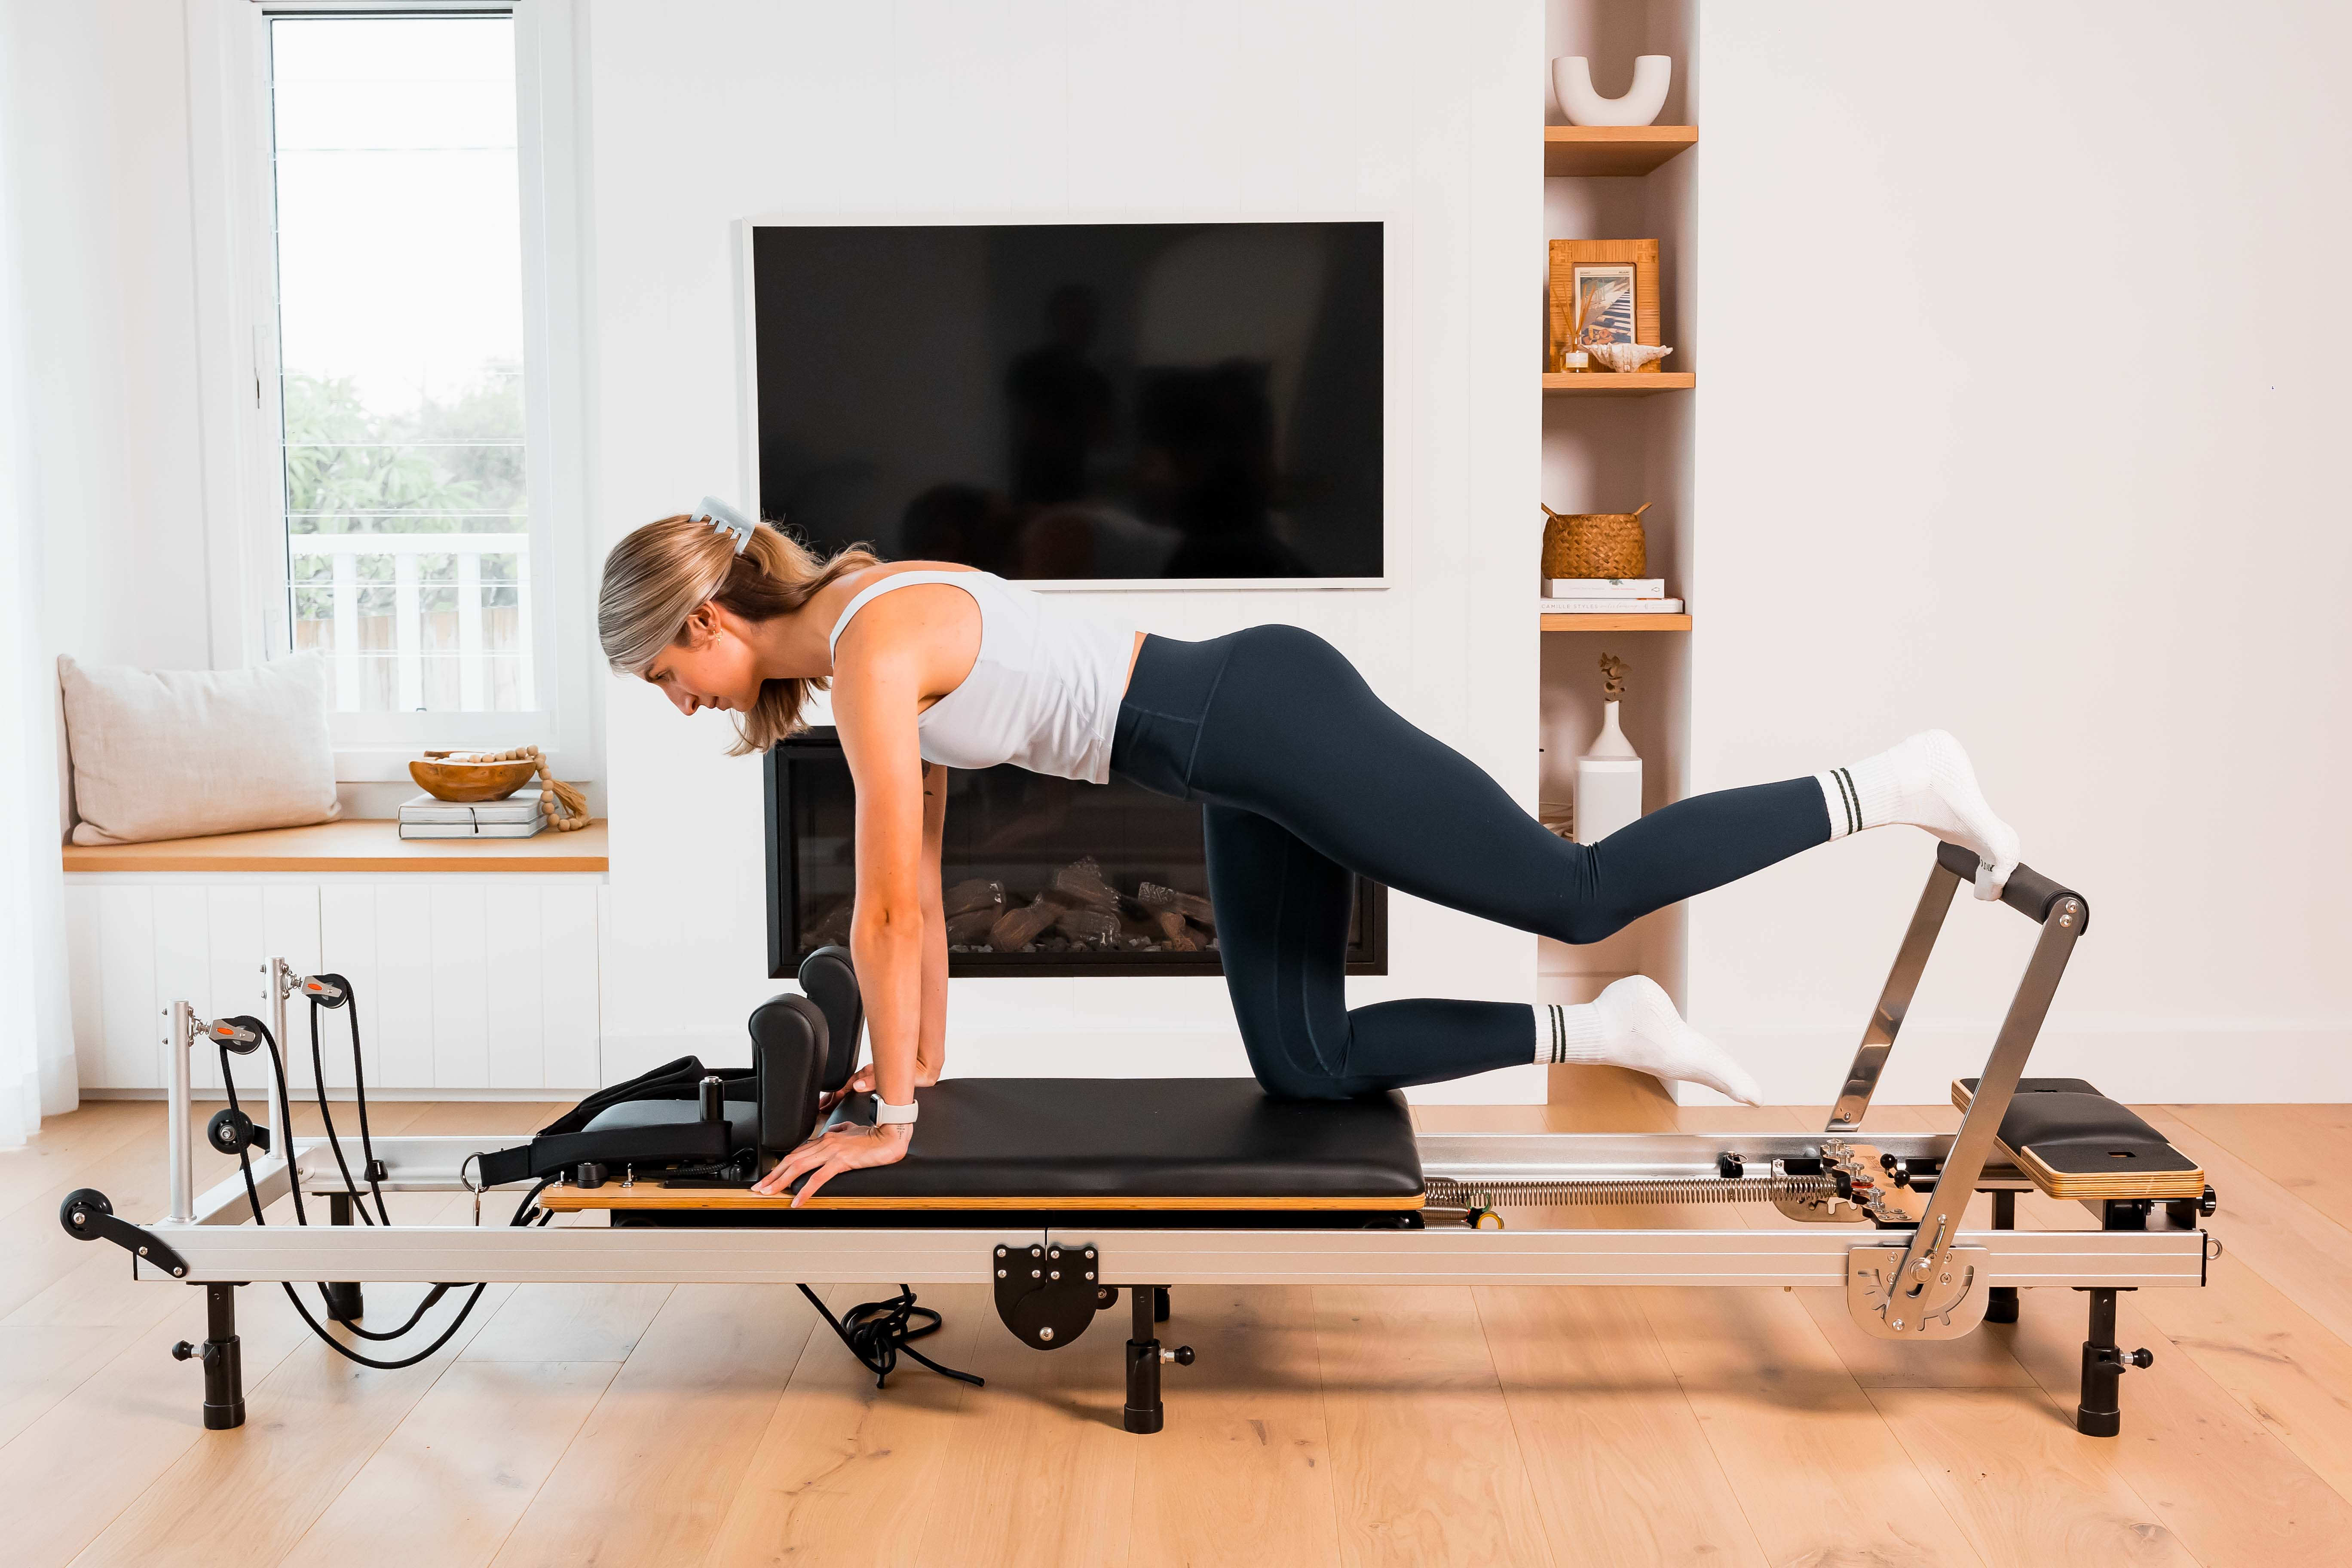 Missing Your Usual Reformer Pilates Class? Recreate It at Home